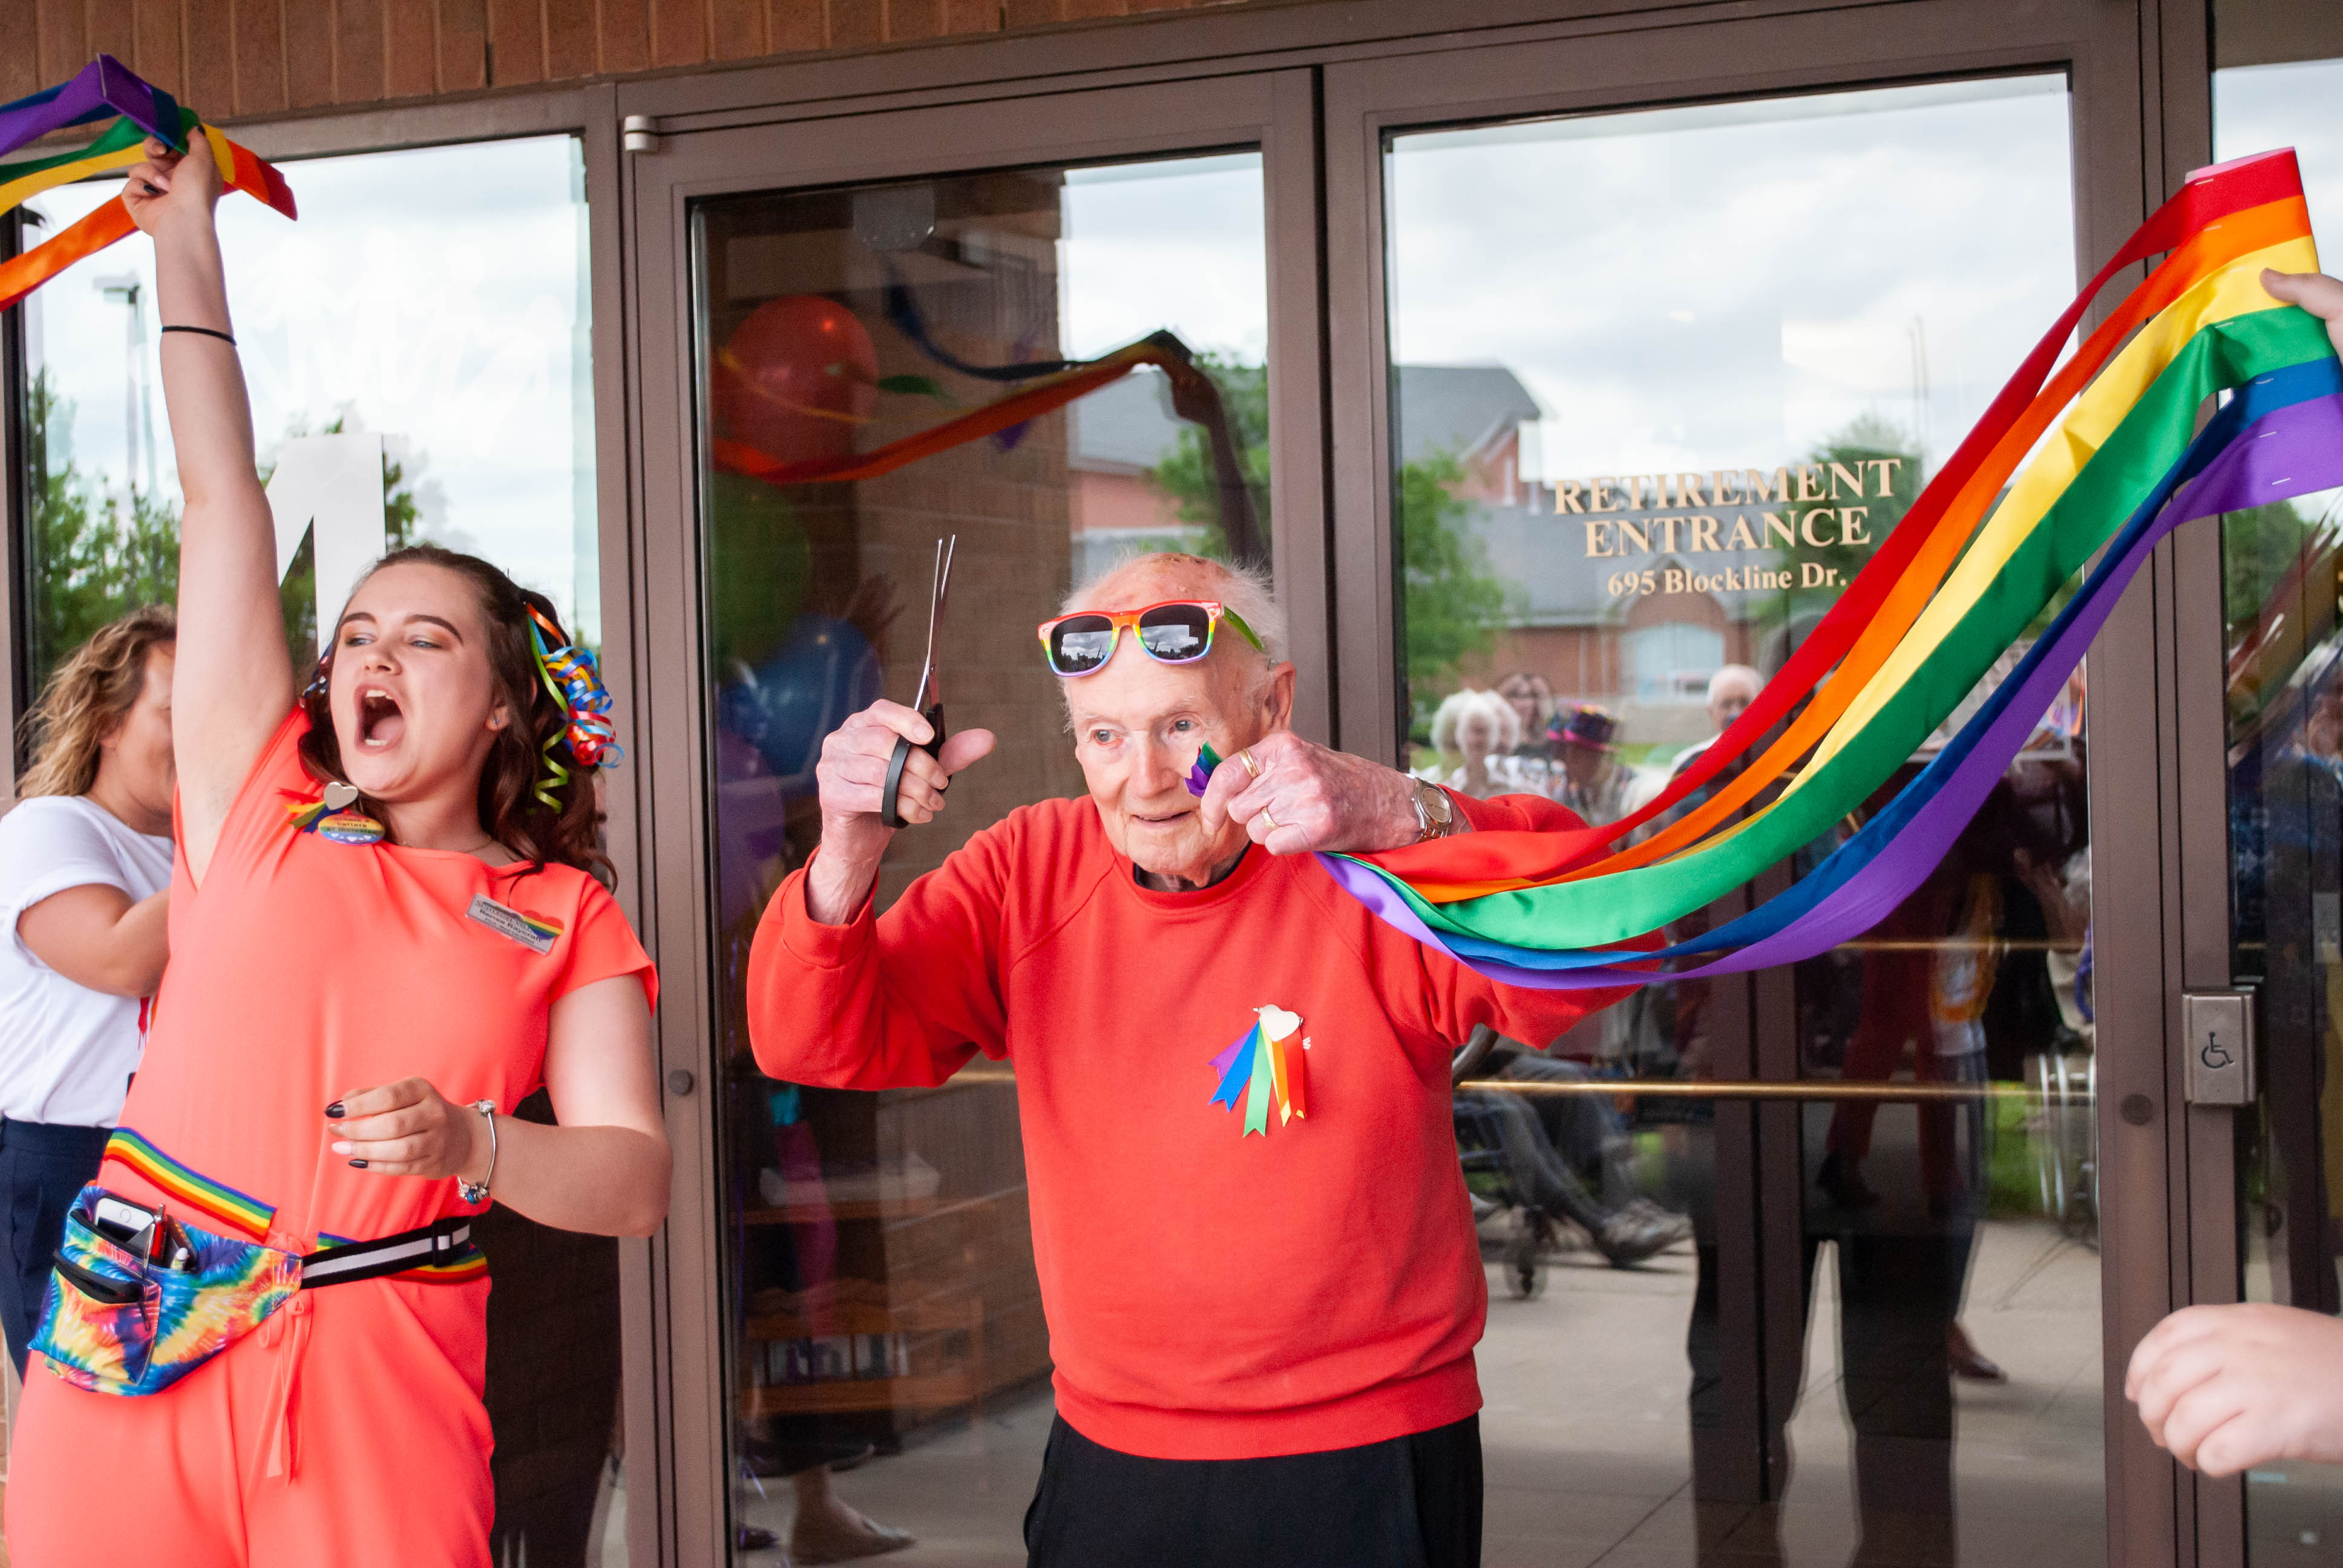 Team members and residents were thrilled to show their pride in inclusion at Winston Park.